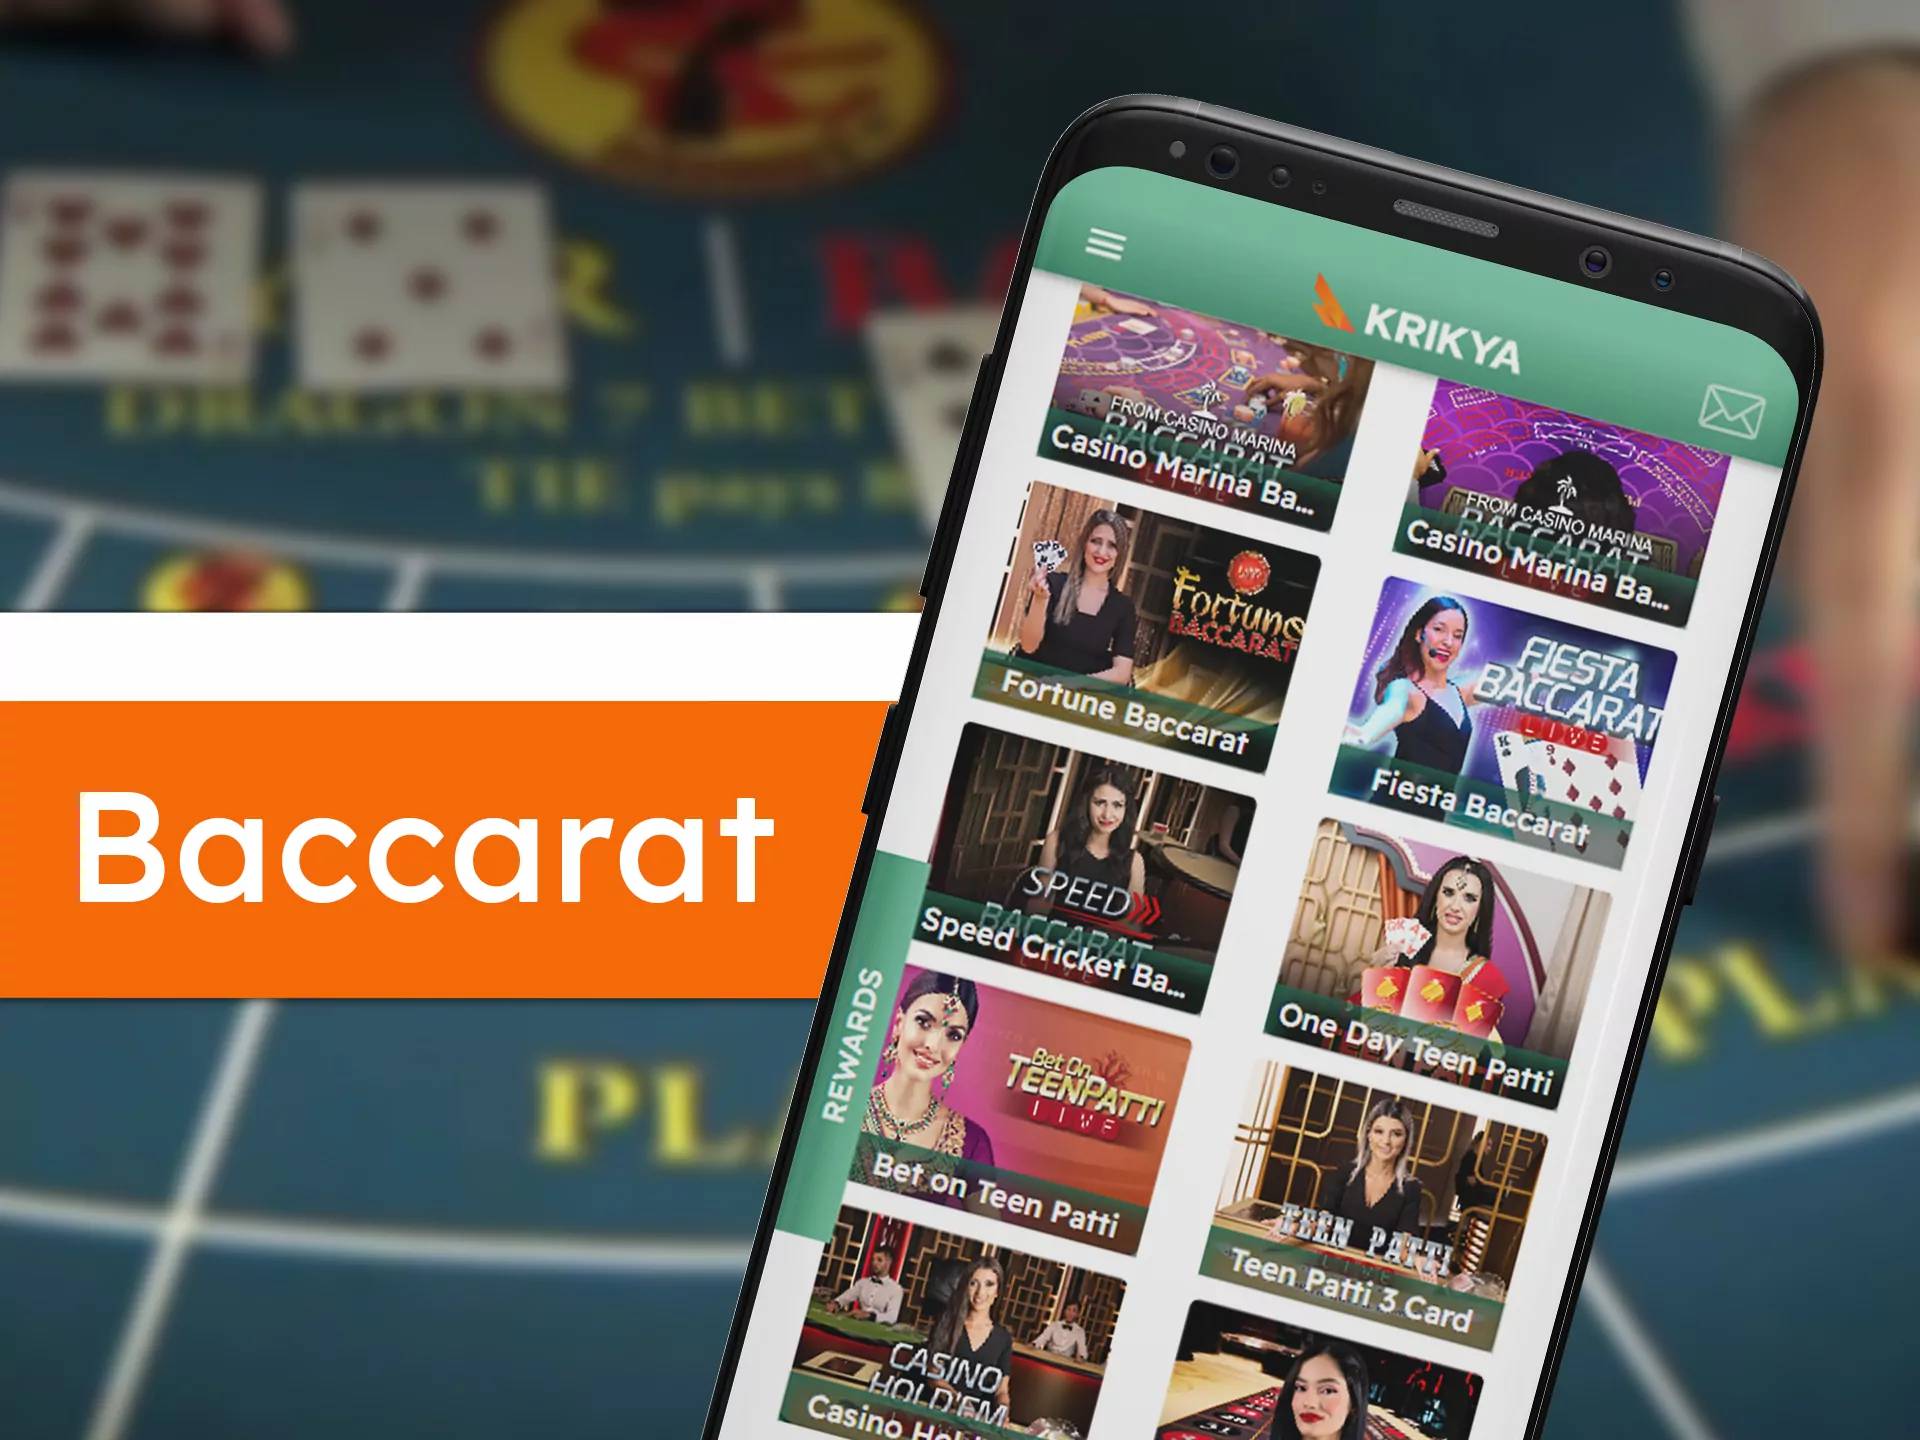 Play baccarat in any place with Krikya app.